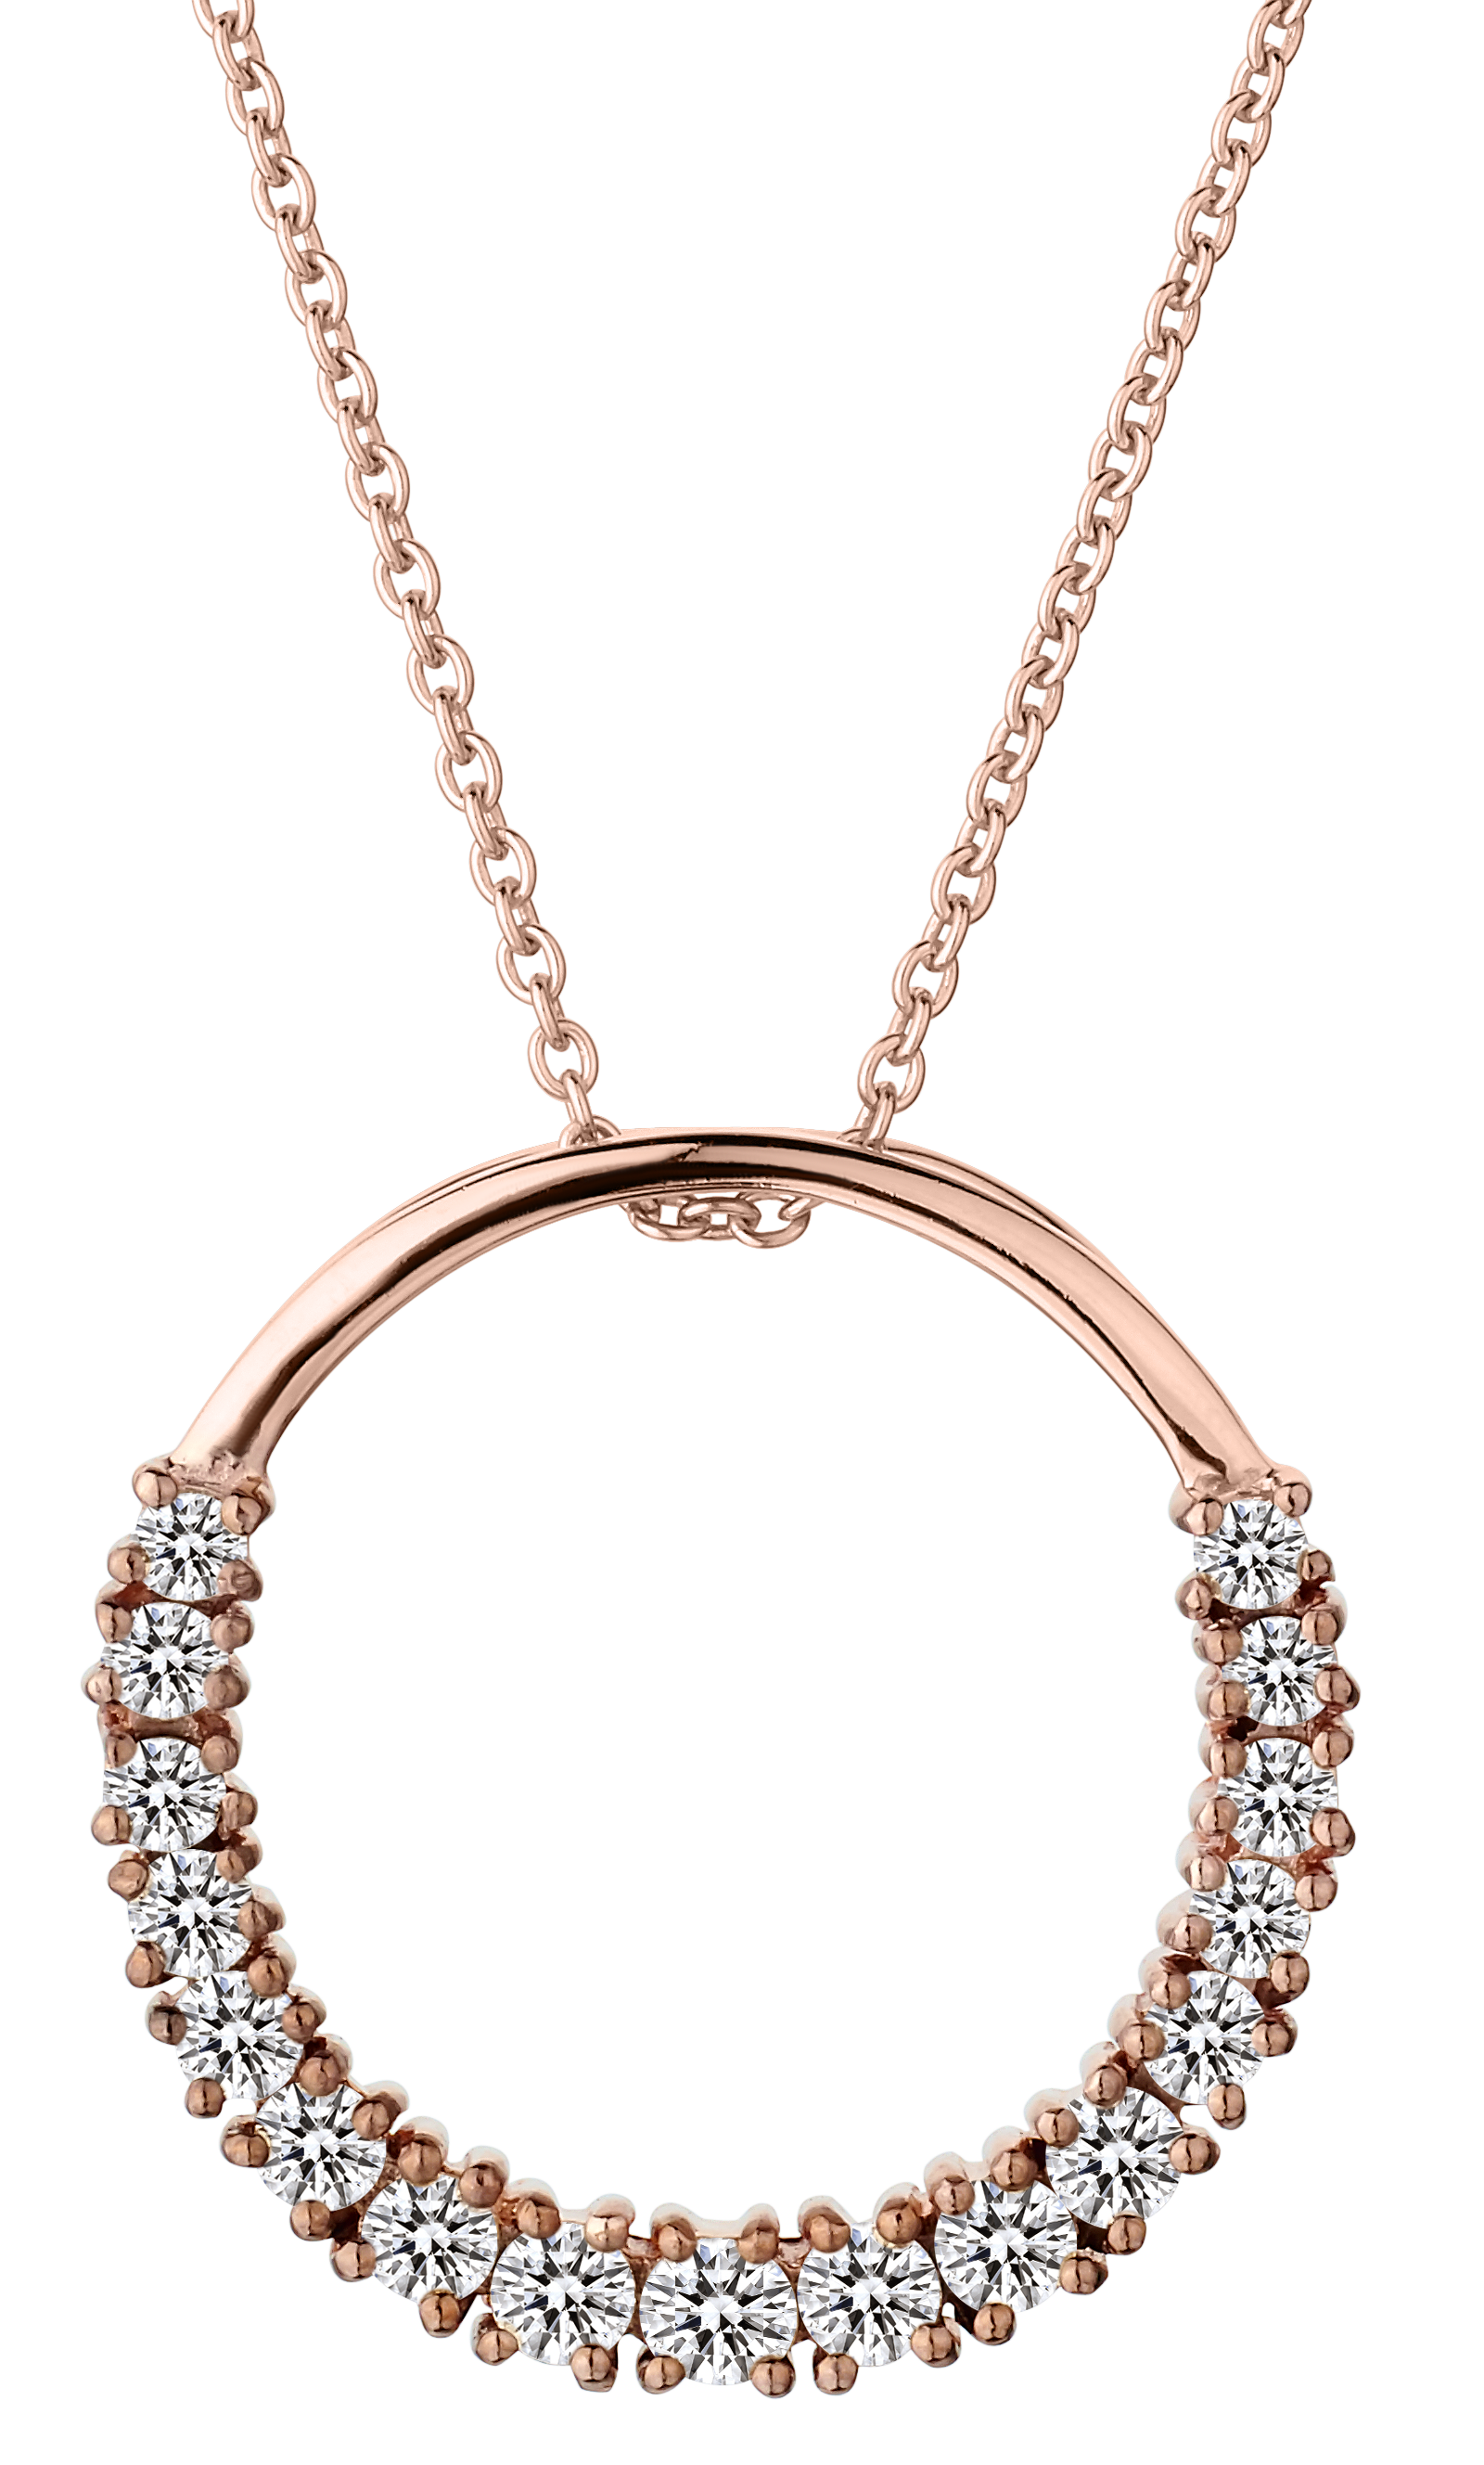 .75 Carat Champagne Diamond Pendant, Sterling Silver (18kt Rose Gold Plated).......................NOW